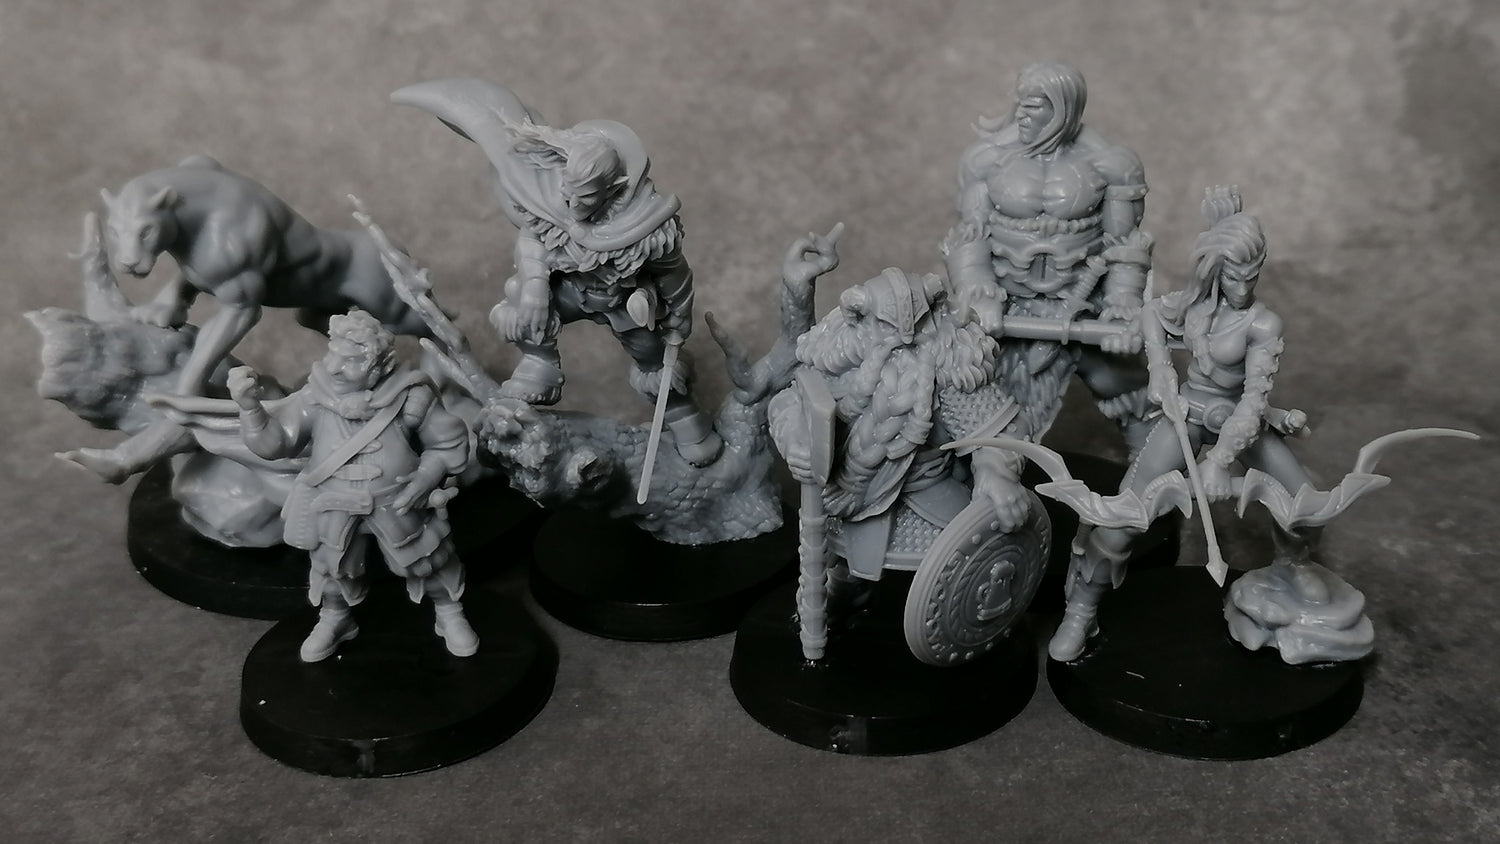 A set of miniatures of the Heroes of the Dale in unpainted resin with support material removed.  The models represent Drizzt Do'Urden, Bruenor Battlehammer, Wulfgar, Regis, Catti-Brie and Guenhwyvar